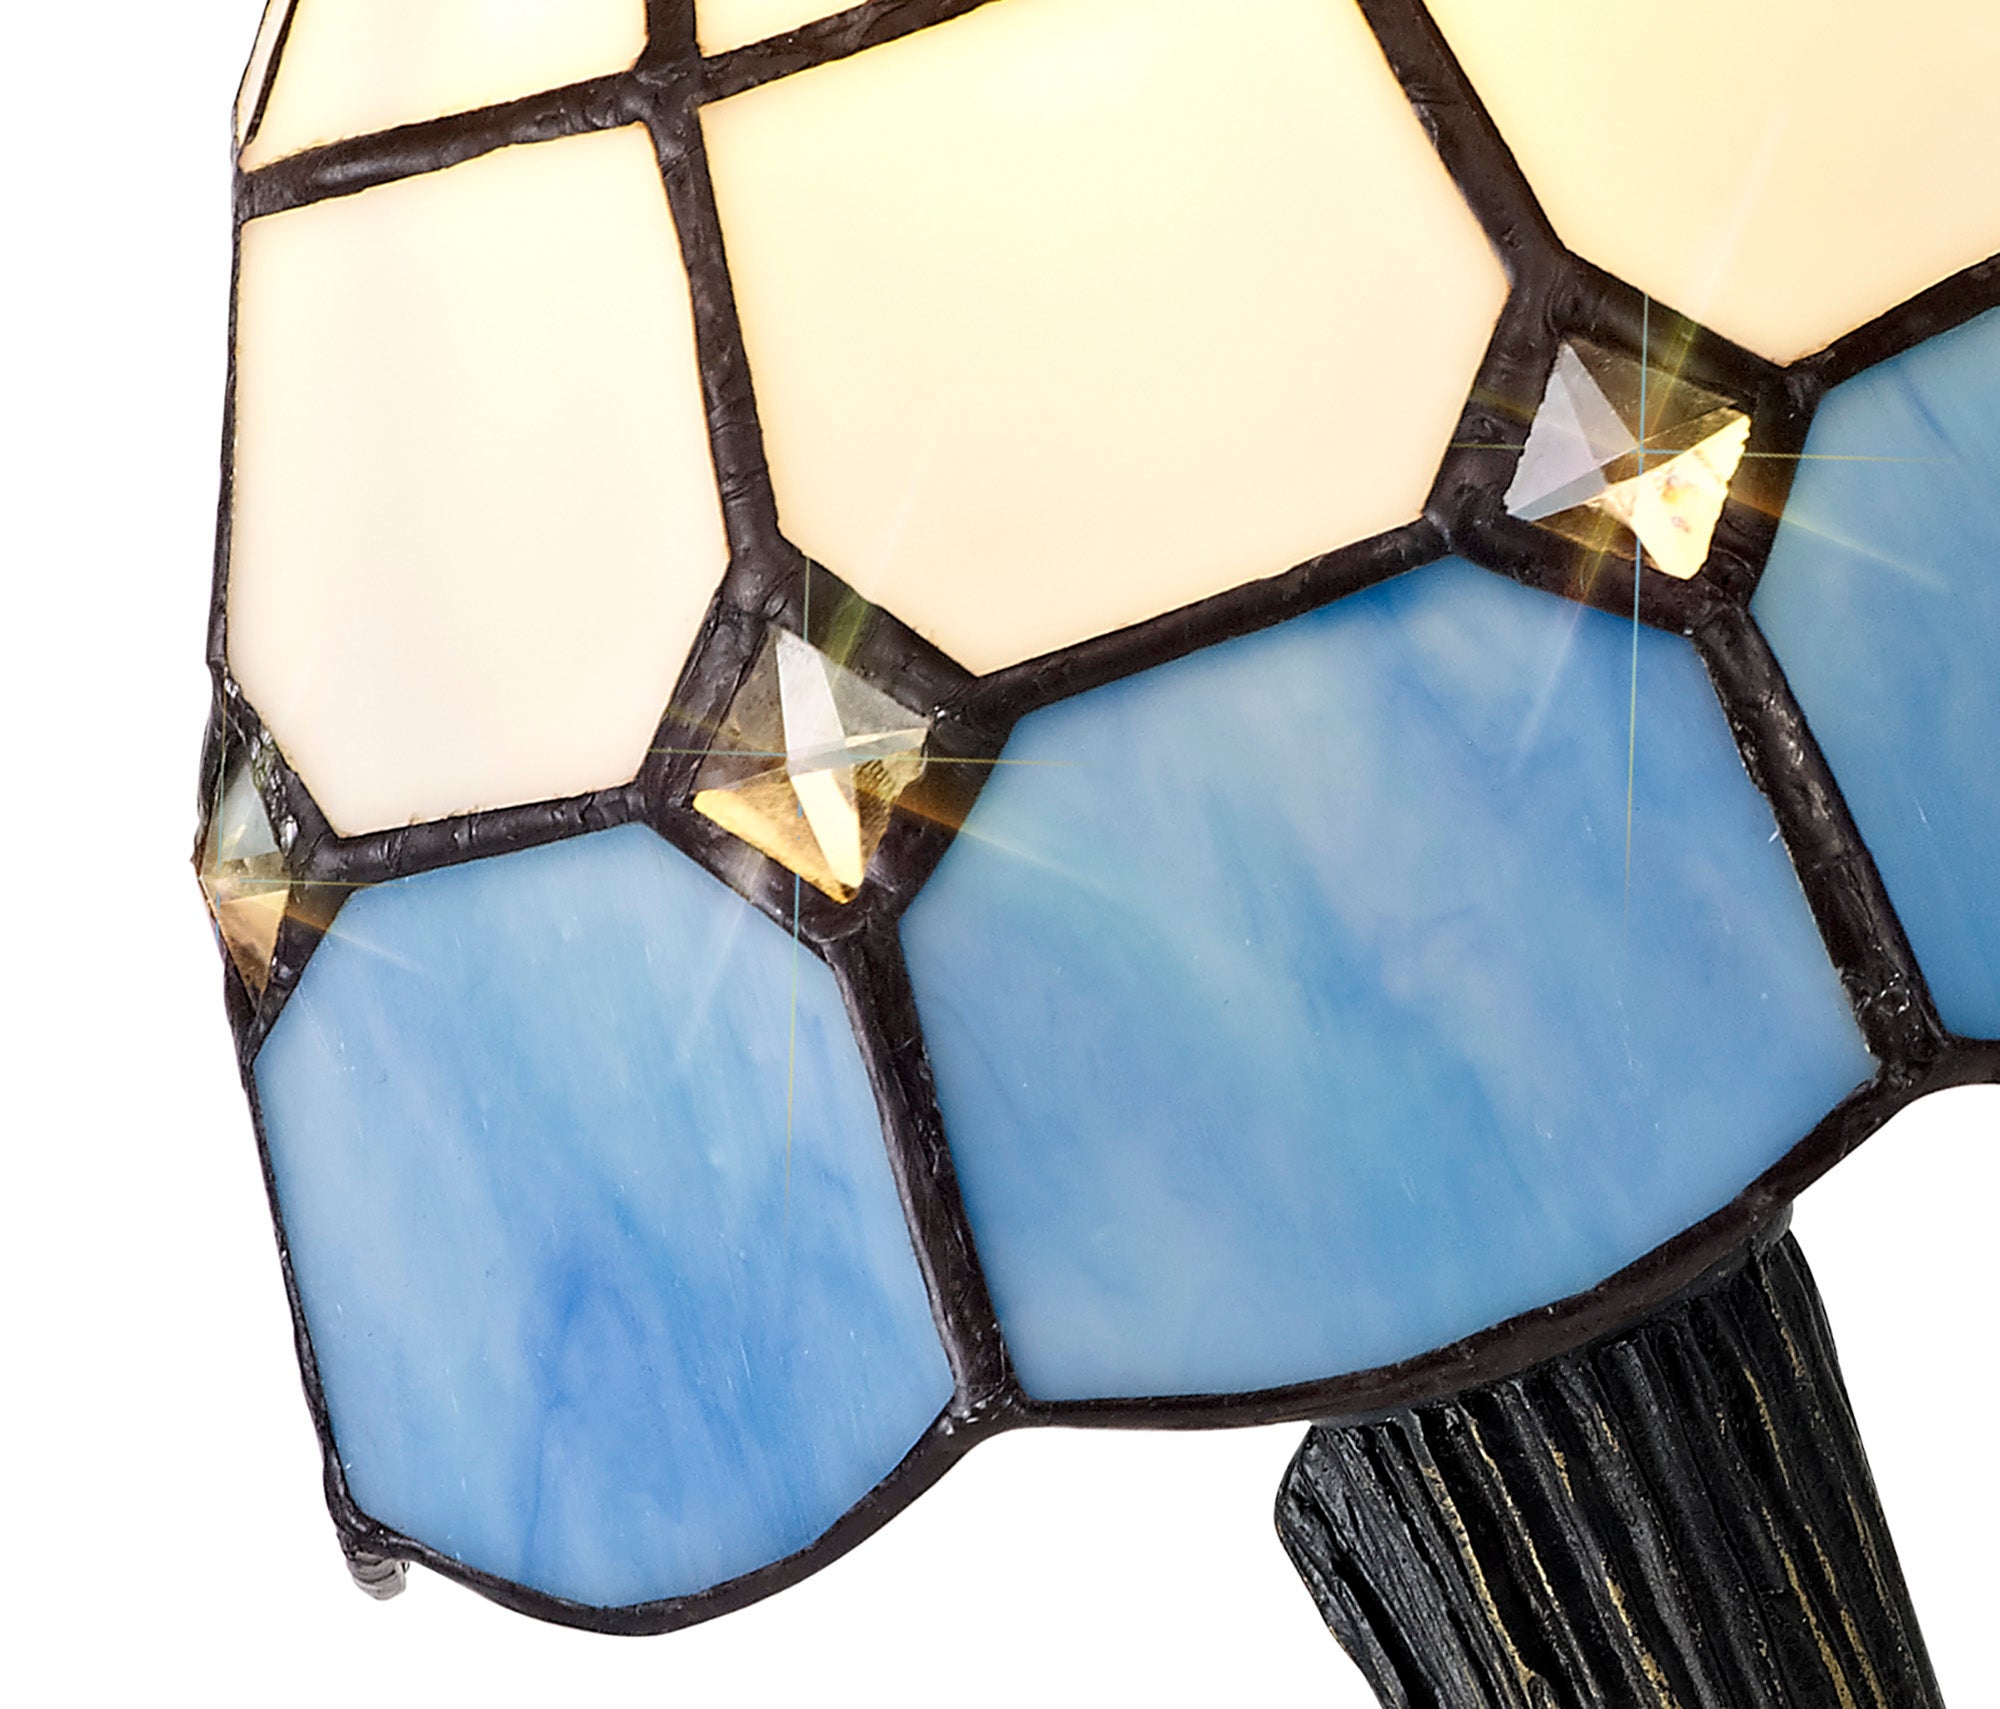 Orly Tiffany Table Lamp, 1 x E14, White & Blue & Clear Crystal Shade